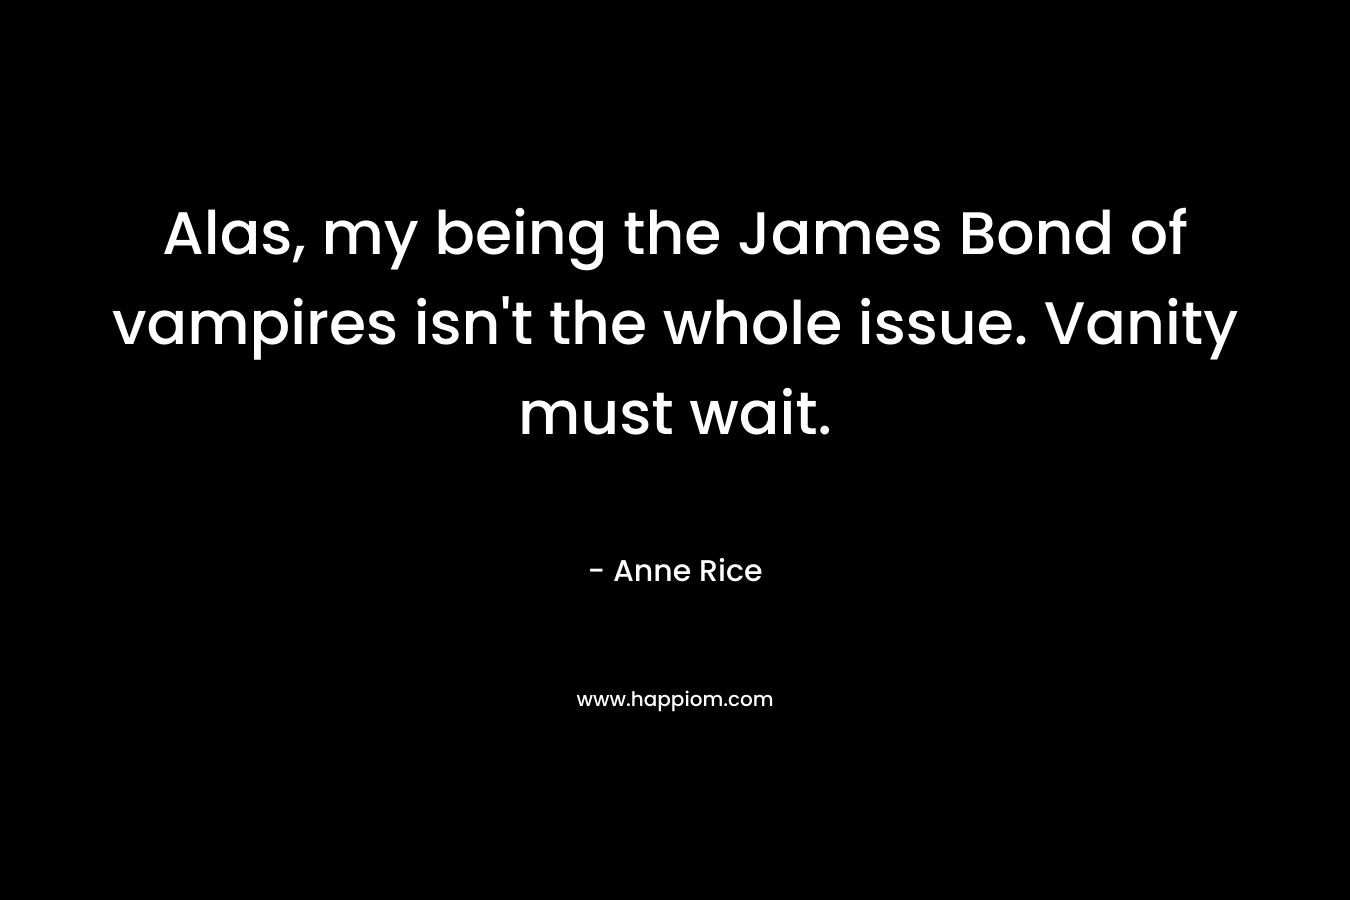 Alas, my being the James Bond of vampires isn’t the whole issue. Vanity must wait. – Anne Rice